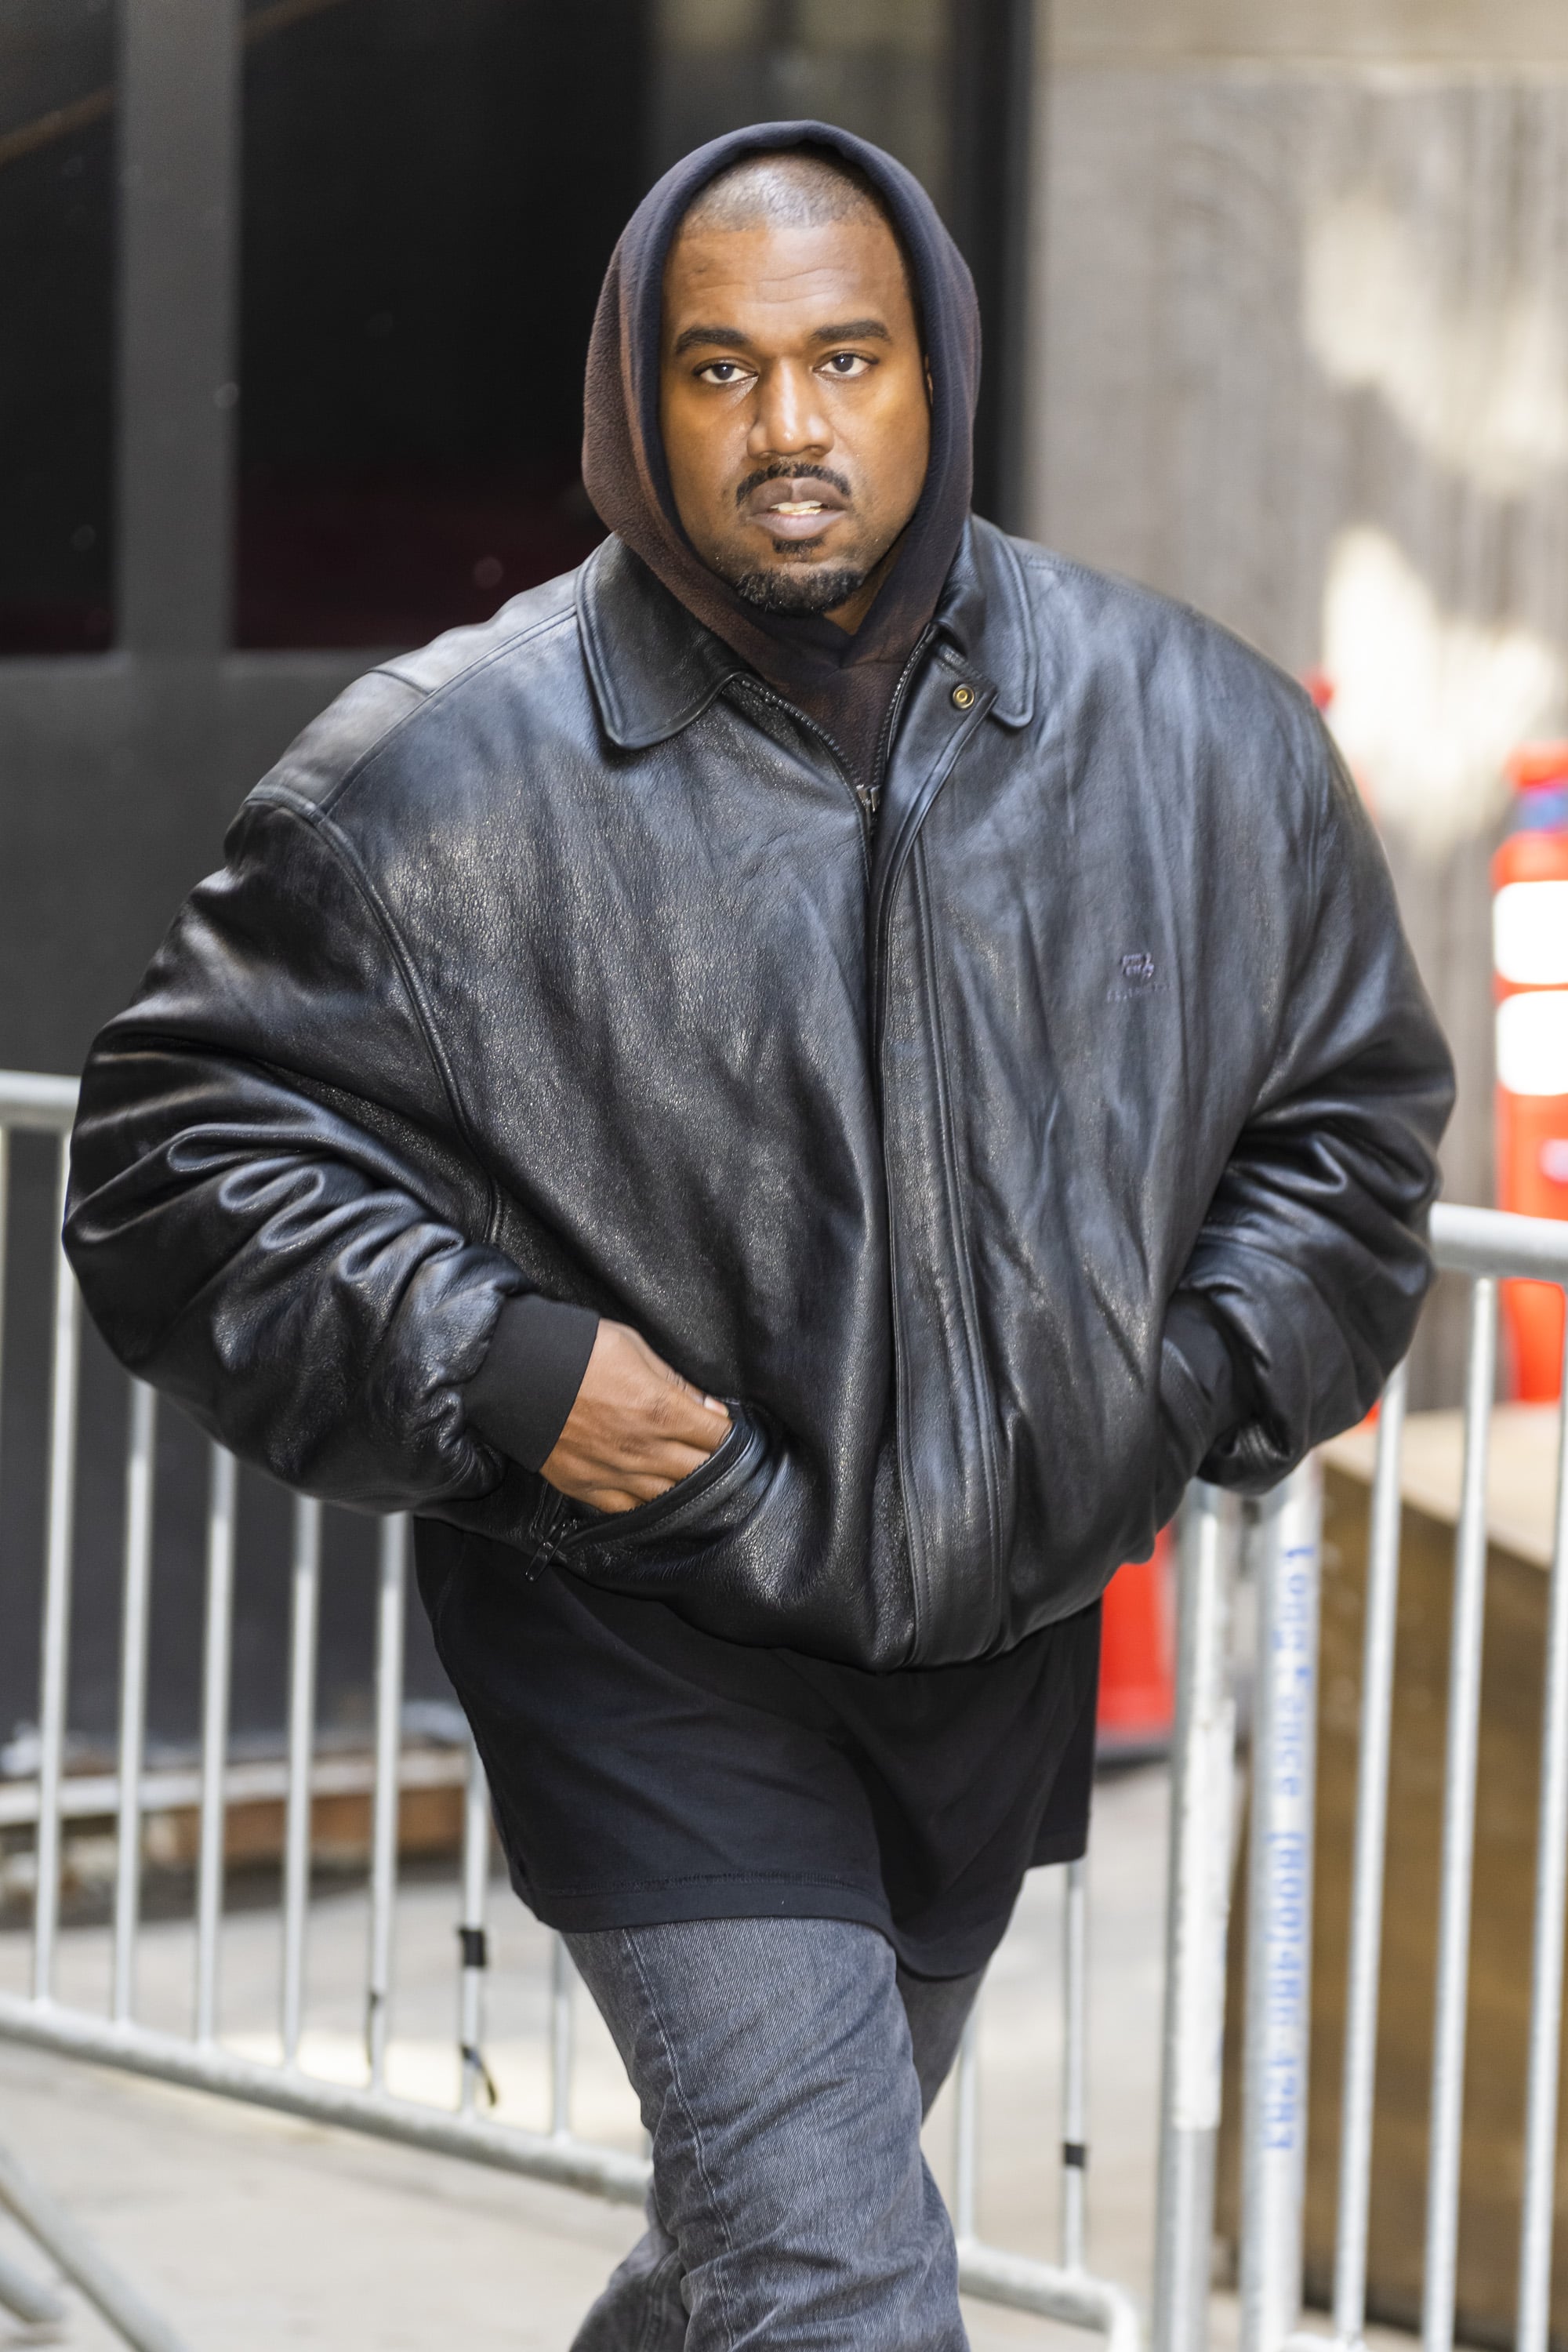 NEW YORK, NEW YORK - MAY 22: Kanye West attends the Balenciaga Spring 2023 Fashion Show at the New York Stock Exchange on May 22, 2022 in New York City.  (Photo by Gotham/GC Images)